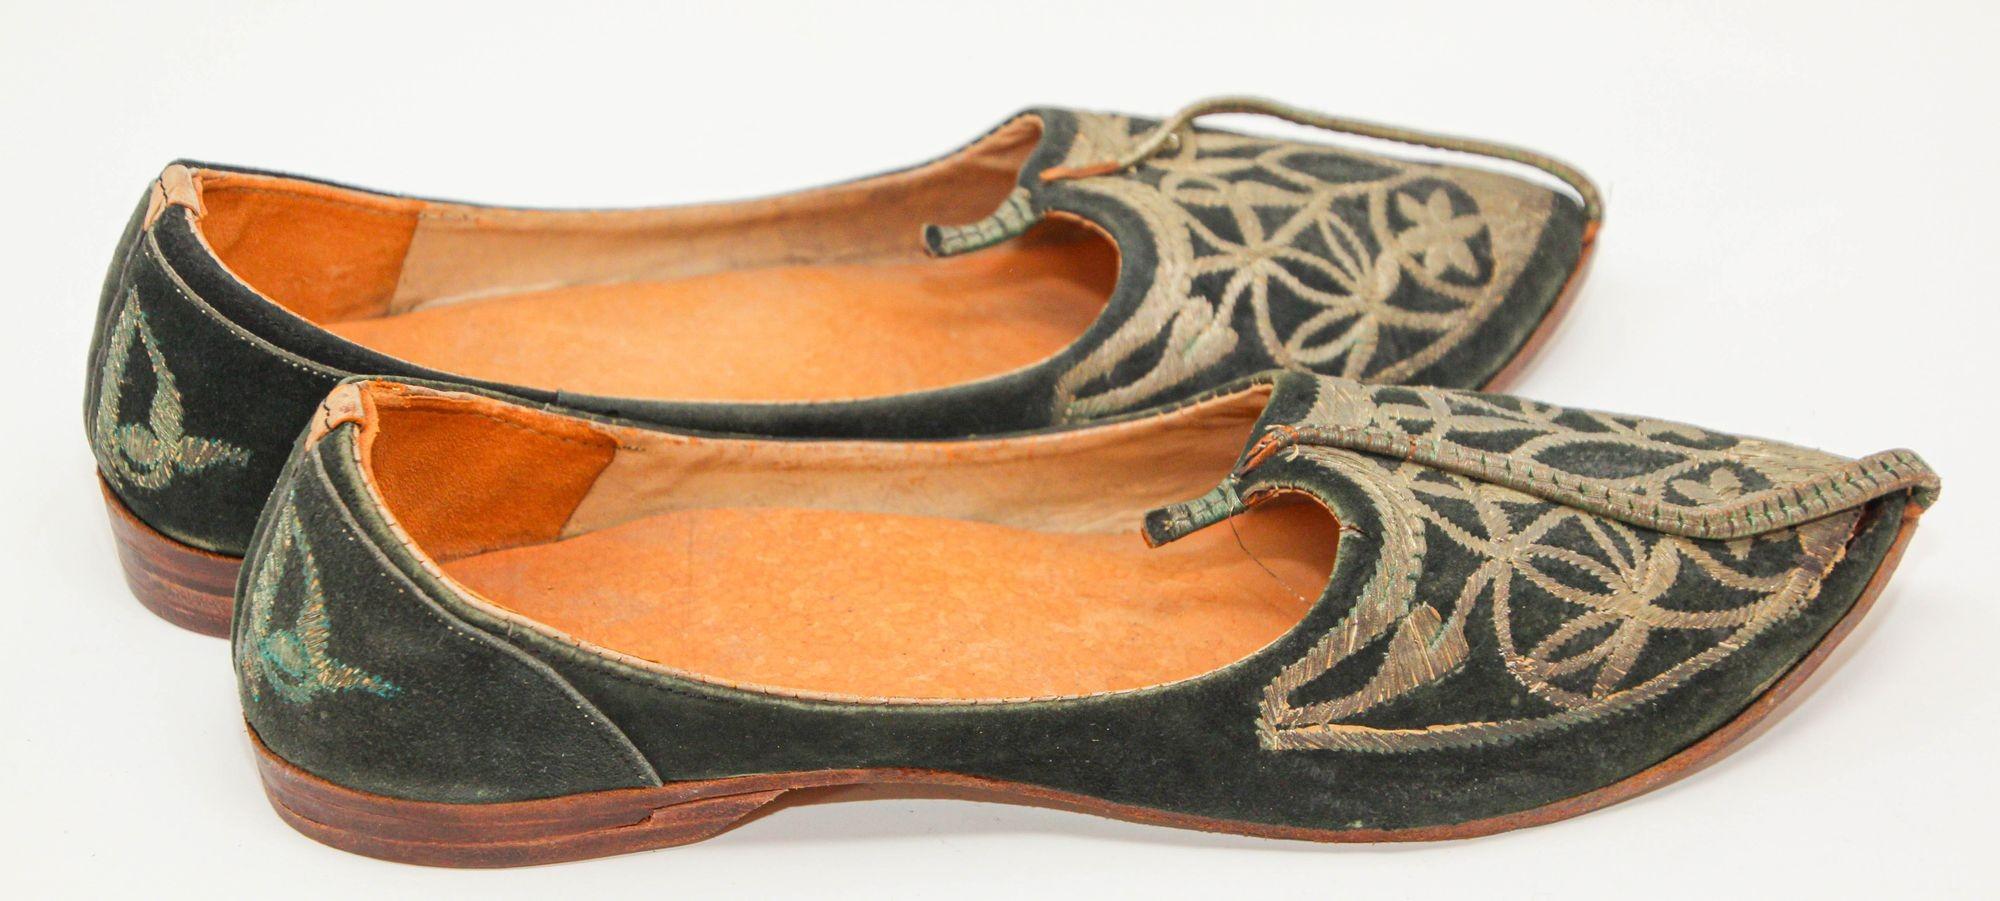 Vintage Collectible Moorish Mughal style Curled Toe Black Leather Shoes from Tony Duquette Estate.
handmade with leather body, the fronts elaborately decorated in handstitched metal bullion. Tapered returned leather front projection in “genie”